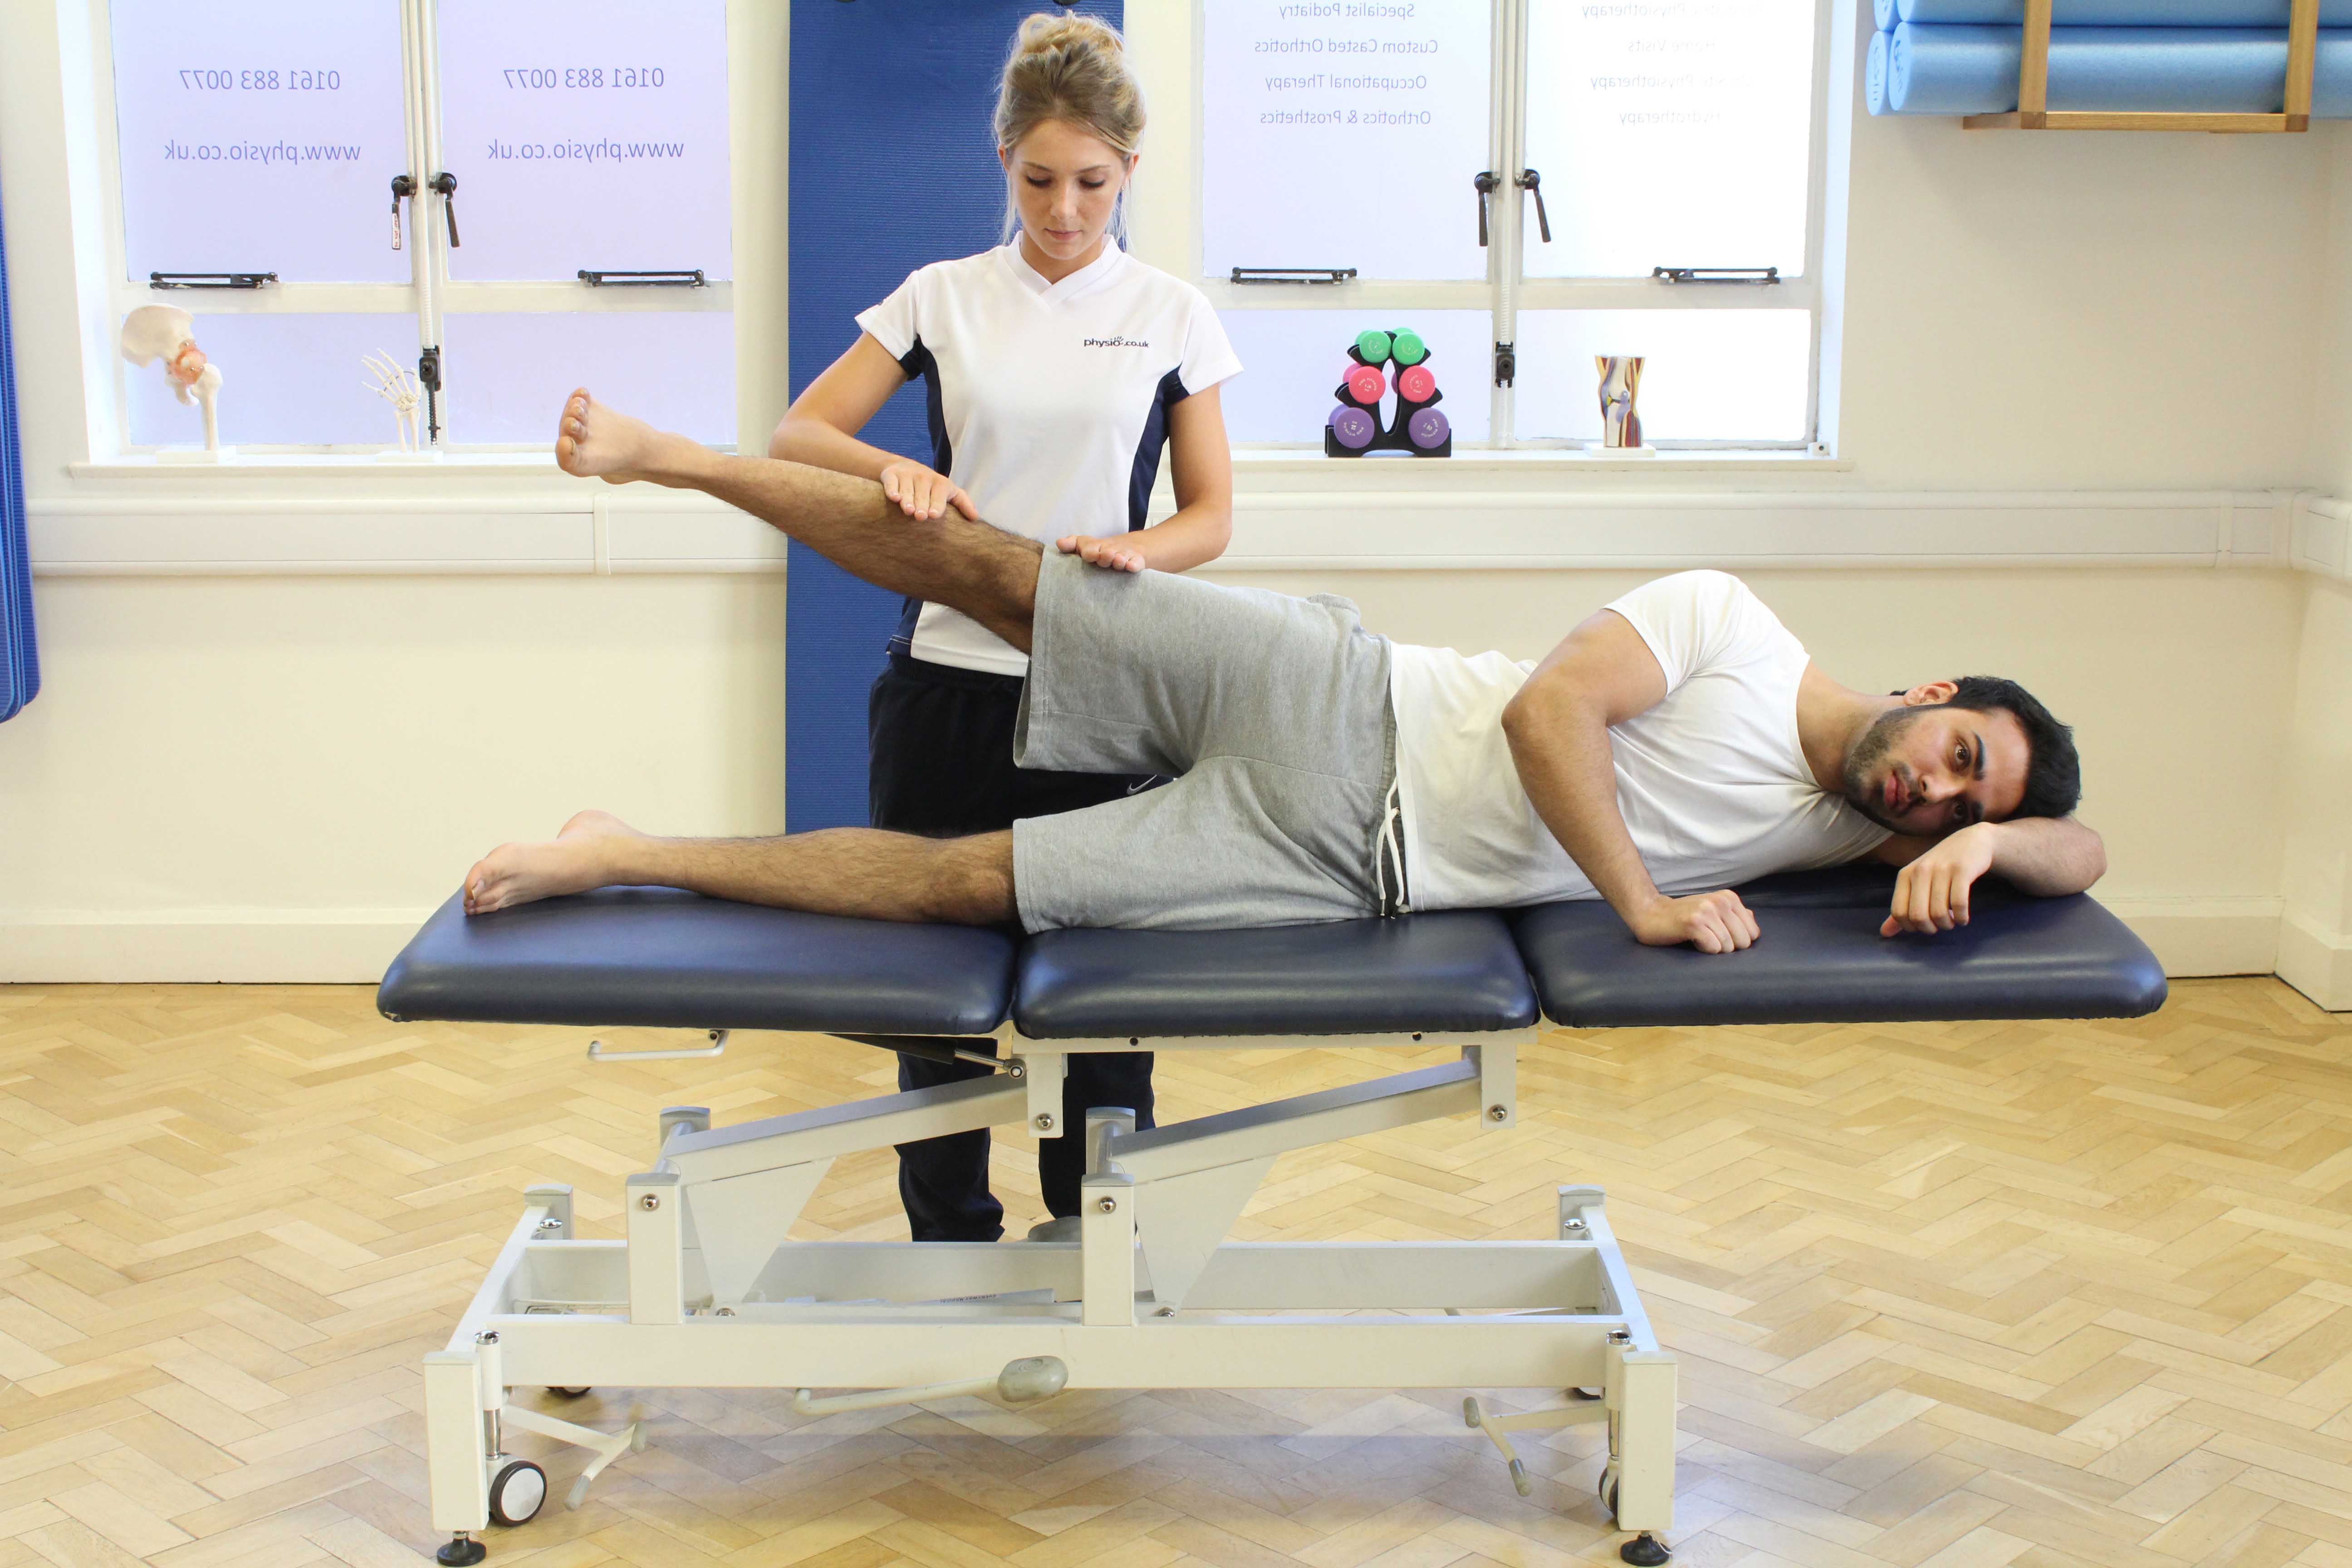 Strengthening exercises for the hip and pelvic muscles, supervised by MSK therapist